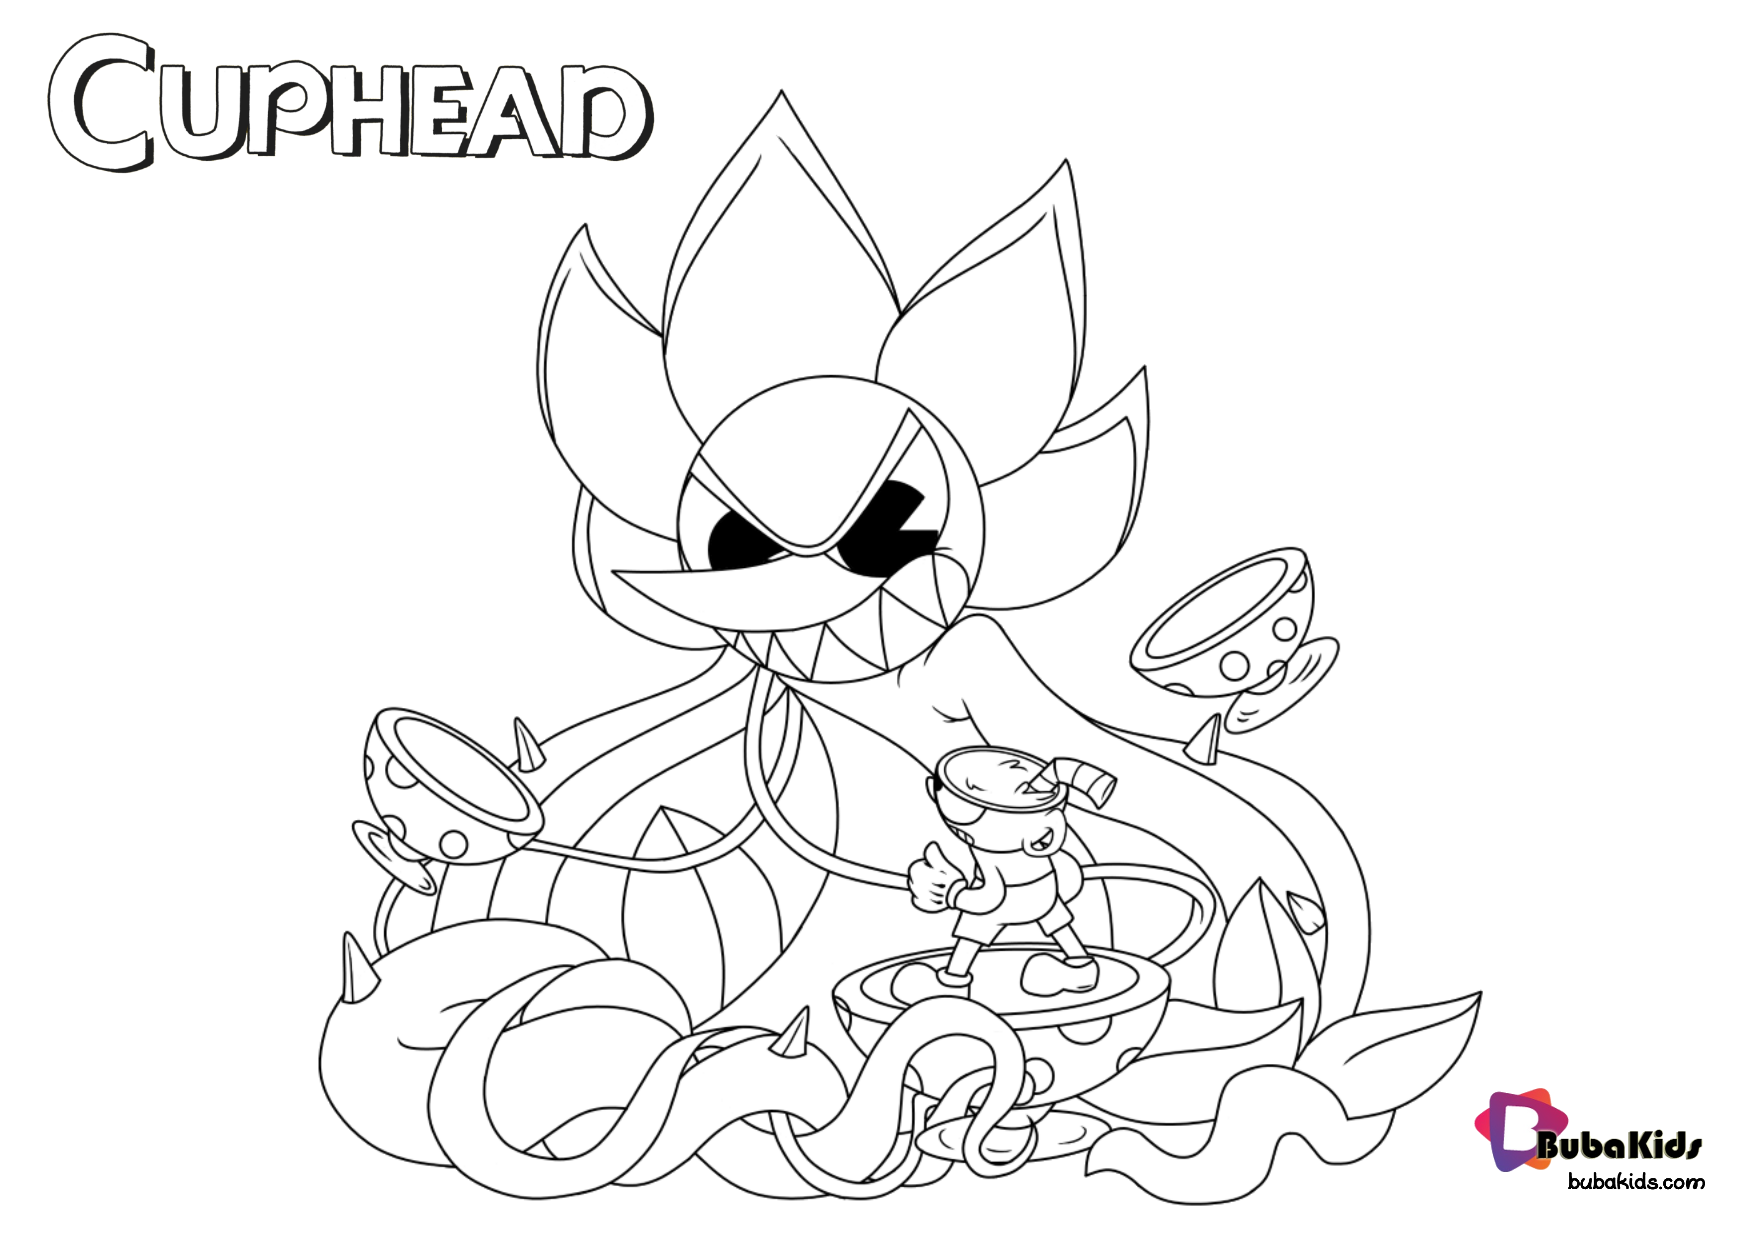 Cuphead games characters coloring pages Wallpaper